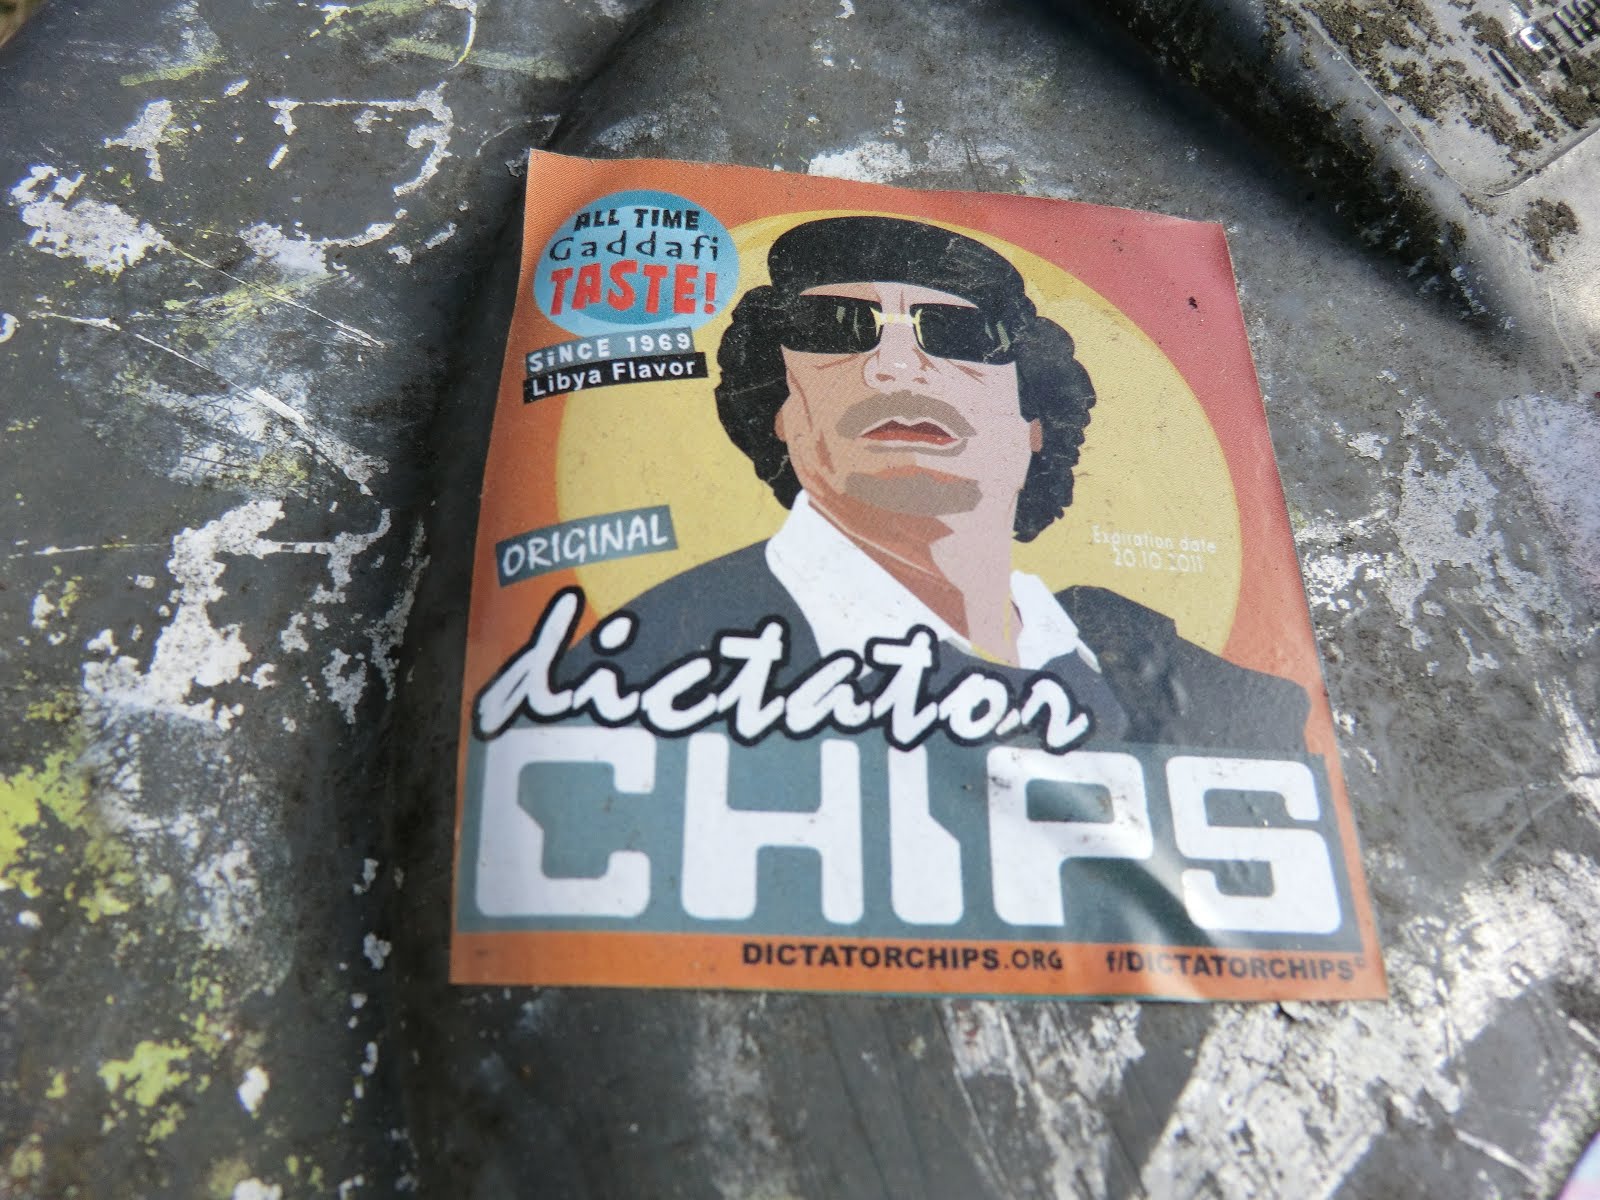 DICTATOR CHIPS